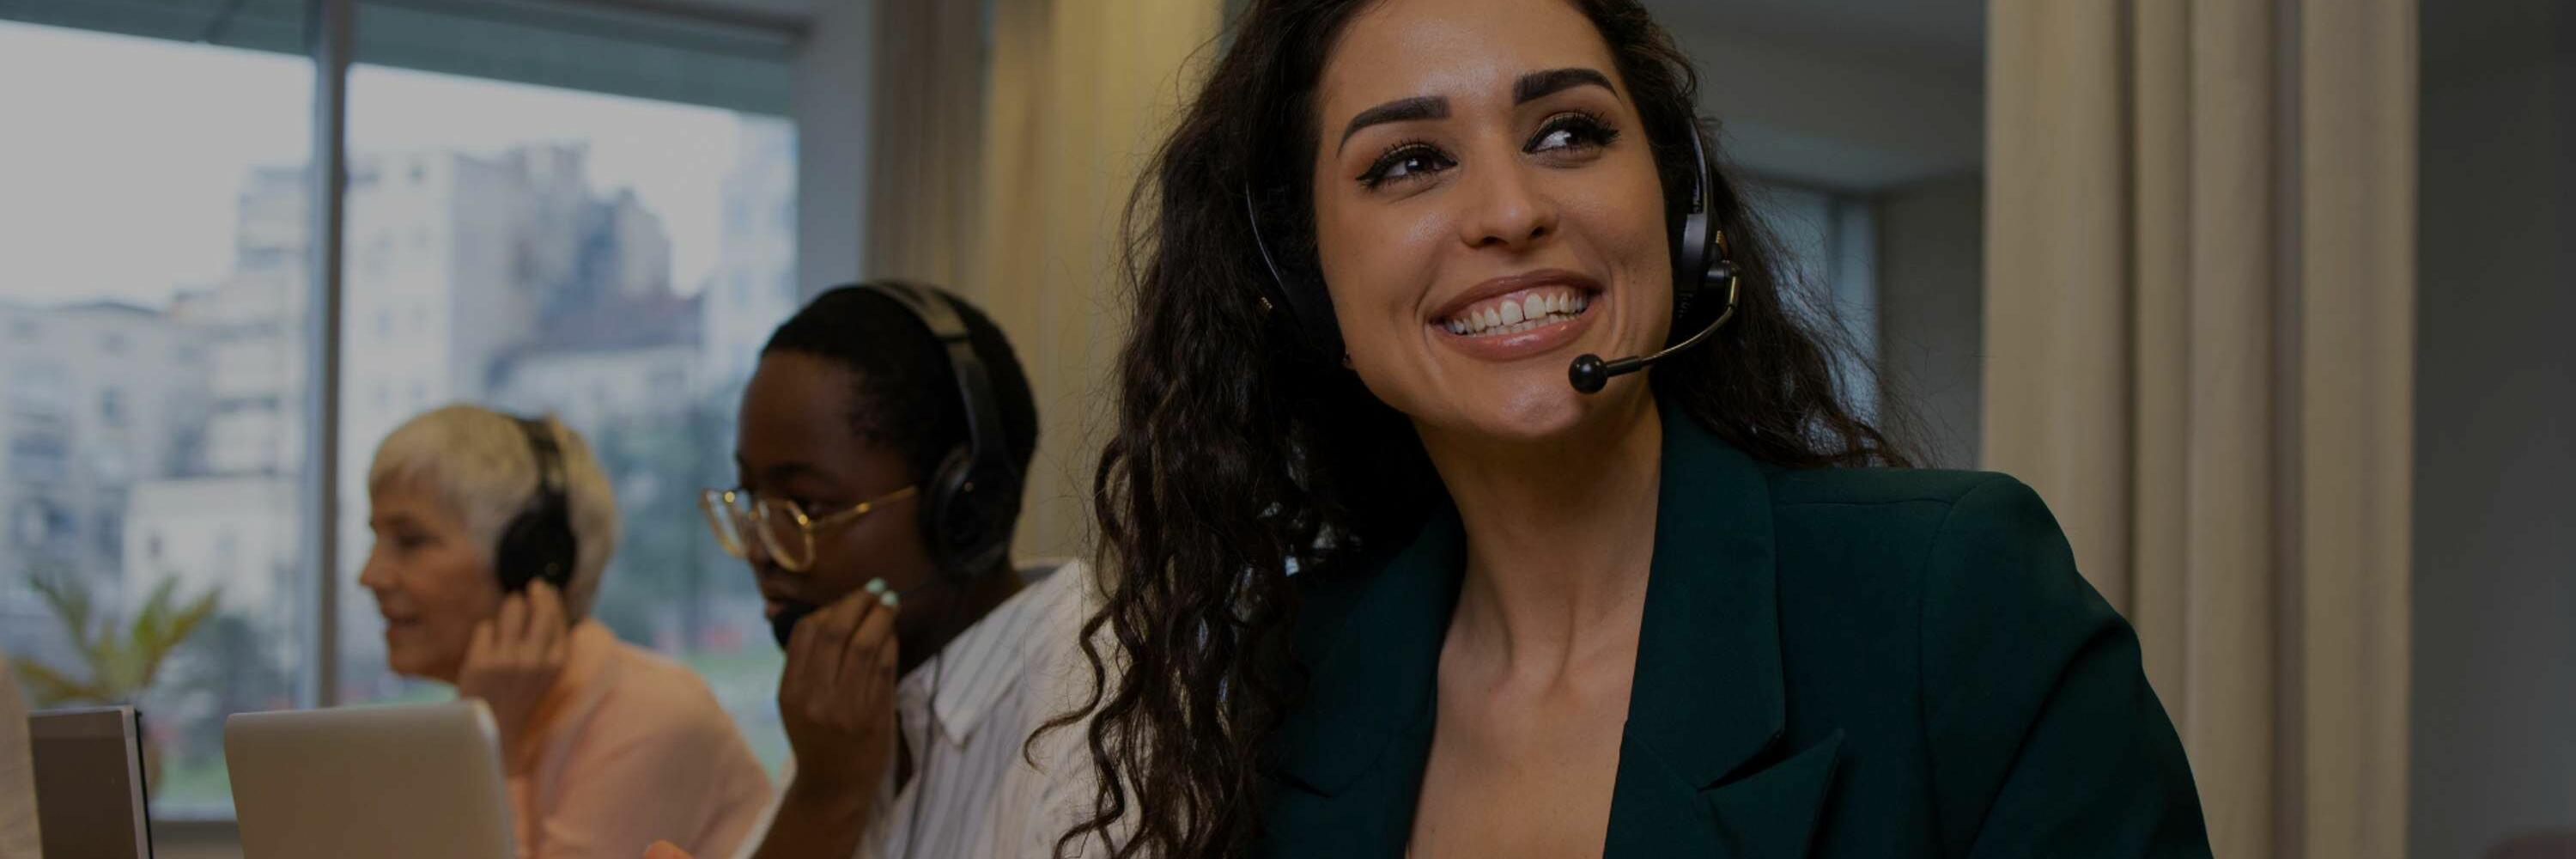 A woman with dark hair wearing a headset and smiling. Two call center employees are seated to her right.